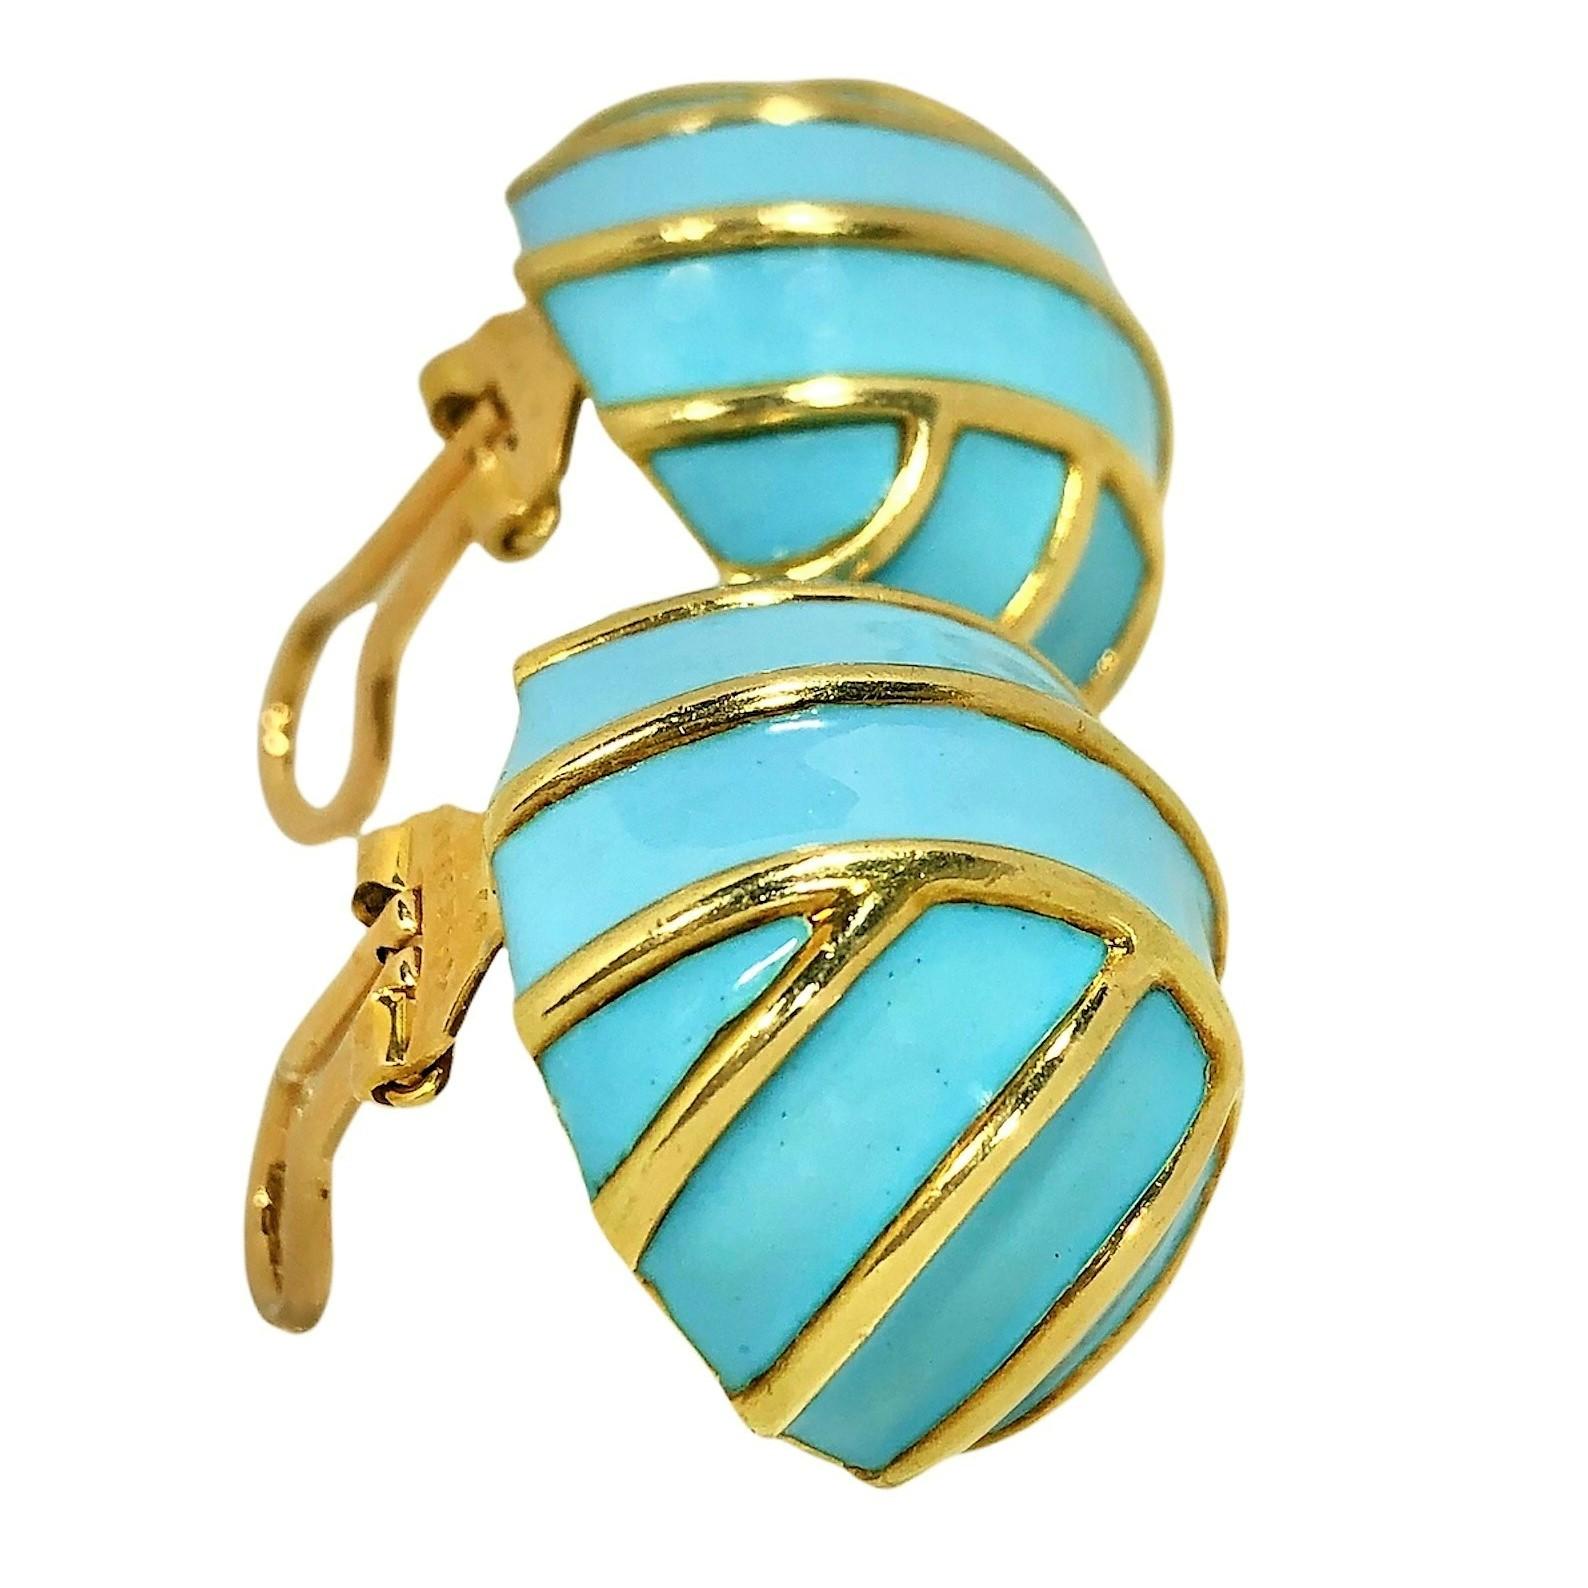 Tiffany & Co. 18k Yellow Gold Dome Earrings with Robins Egg Blue Enamel In Excellent Condition For Sale In Palm Beach, FL